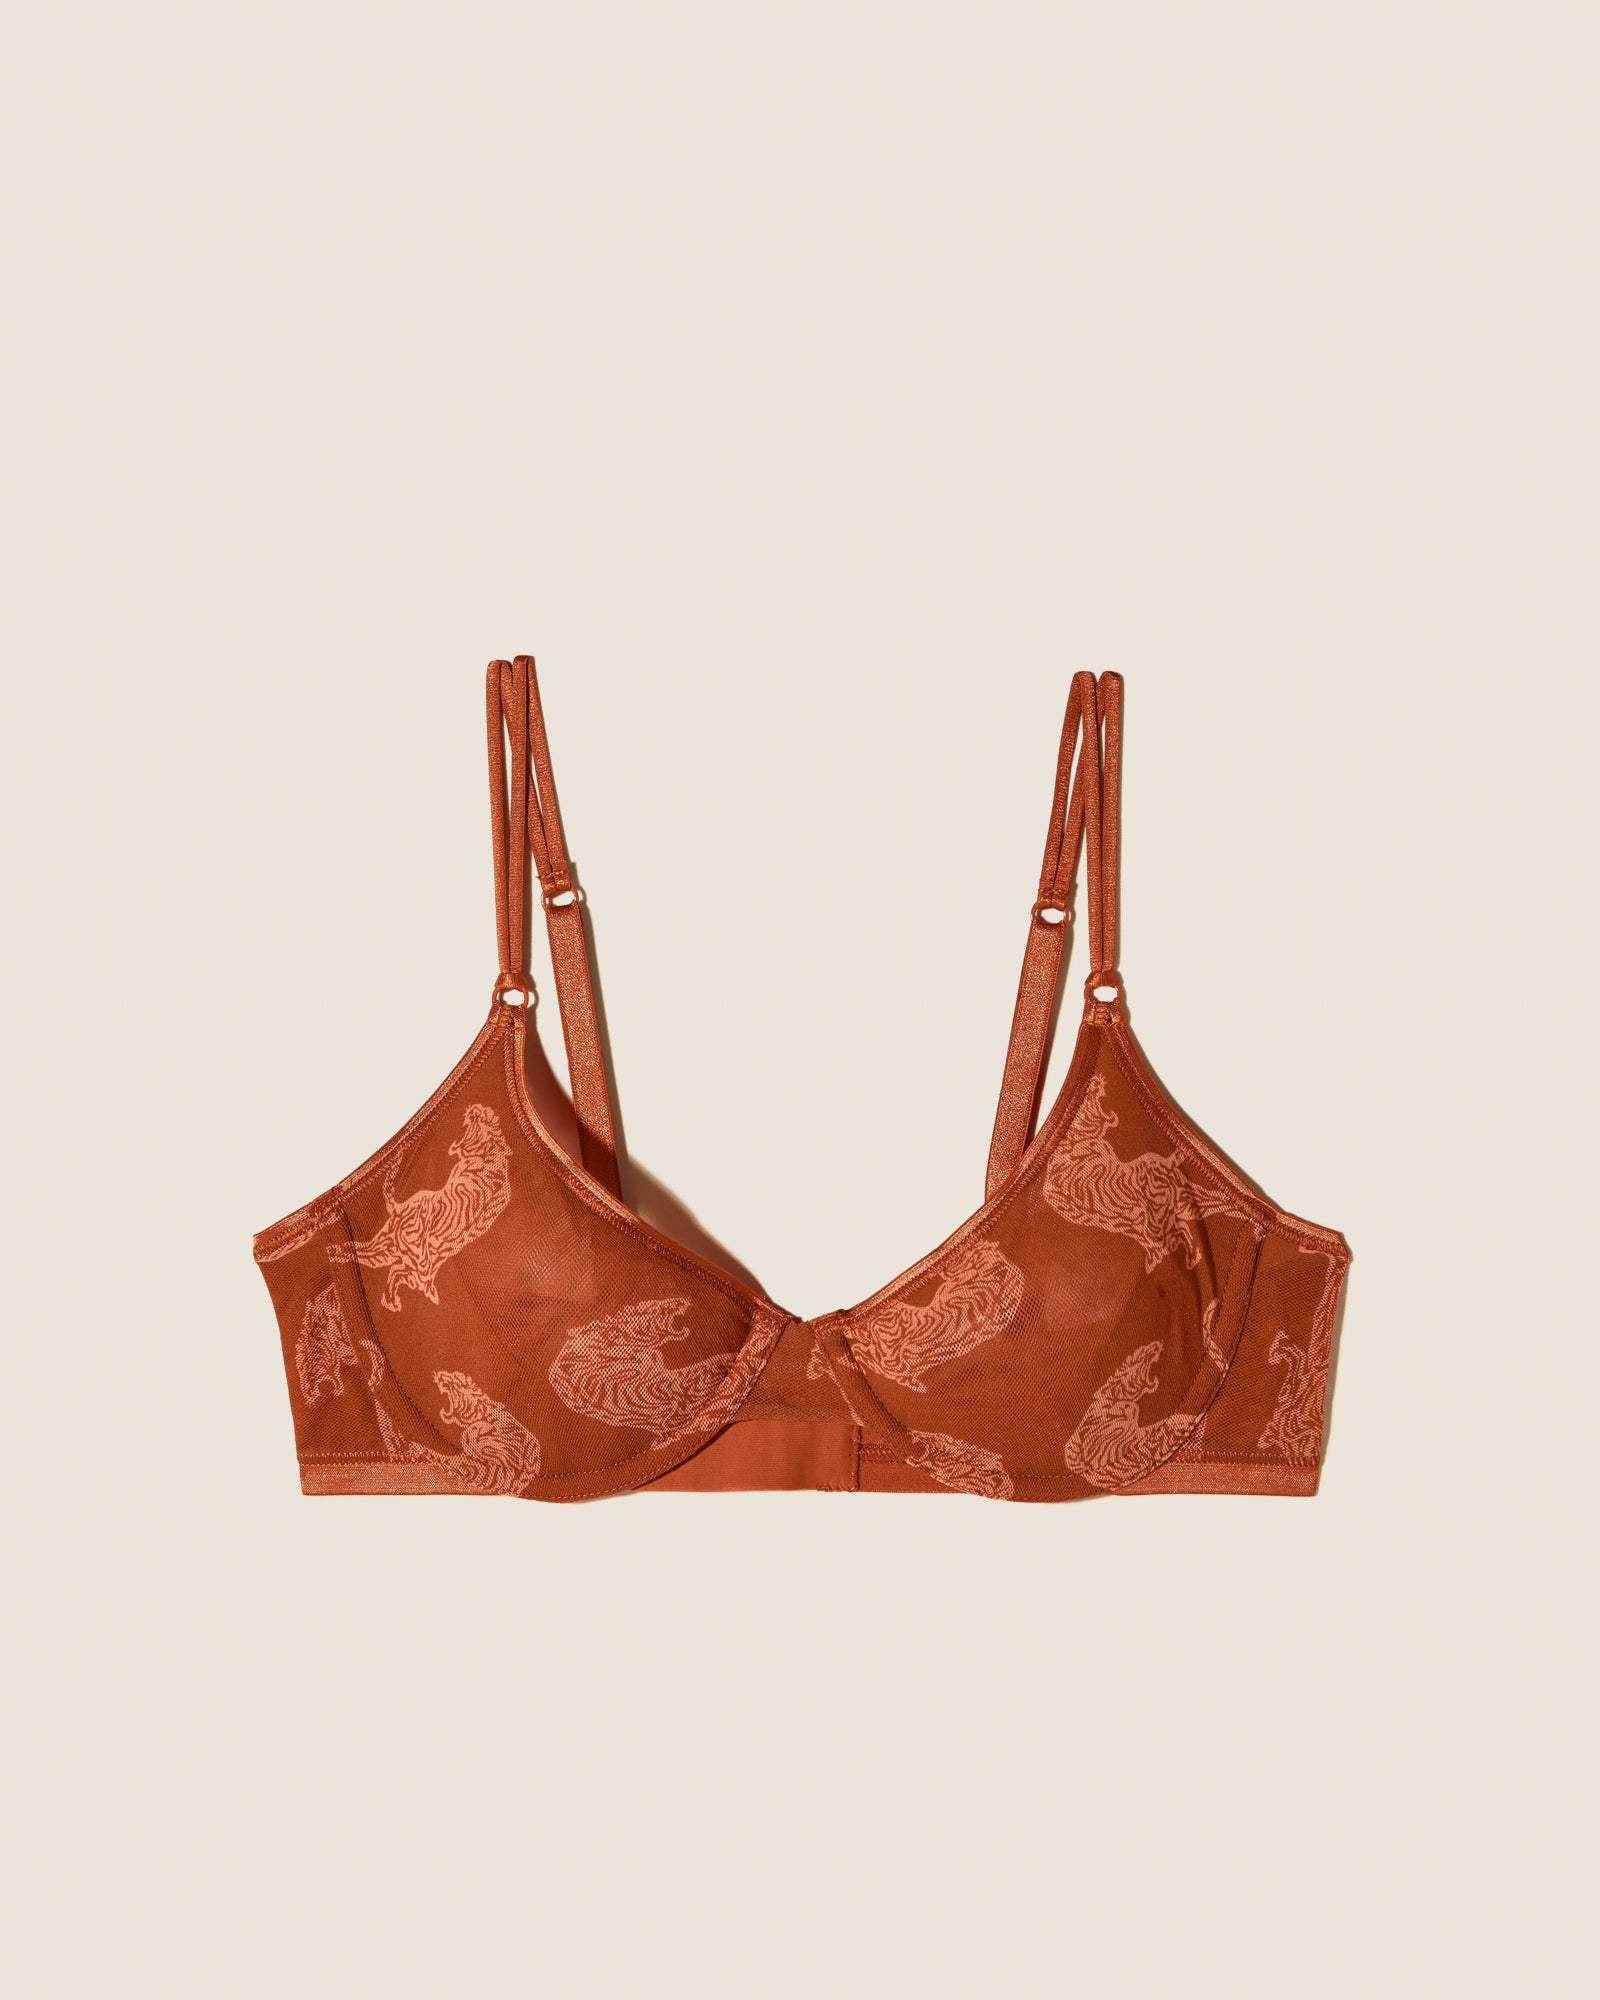 CLEARANCE Cosabella Soire Confidence Printed Molded Bra 32B, 32C